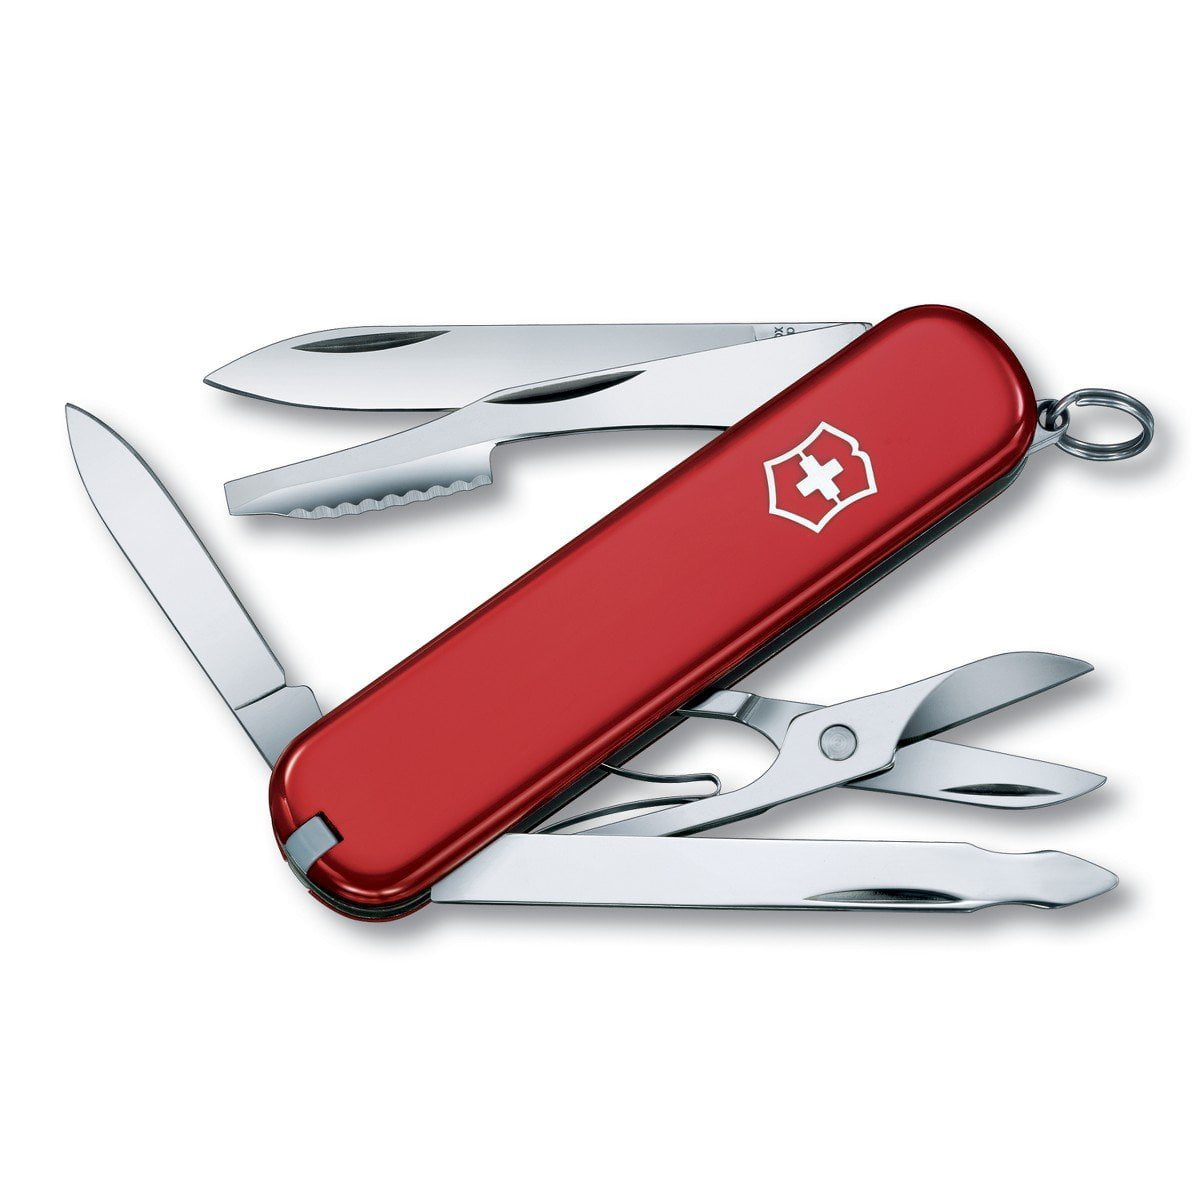 Swiss Army 53401 3Inch Executive Swiss Army Knife, Red, Compact and